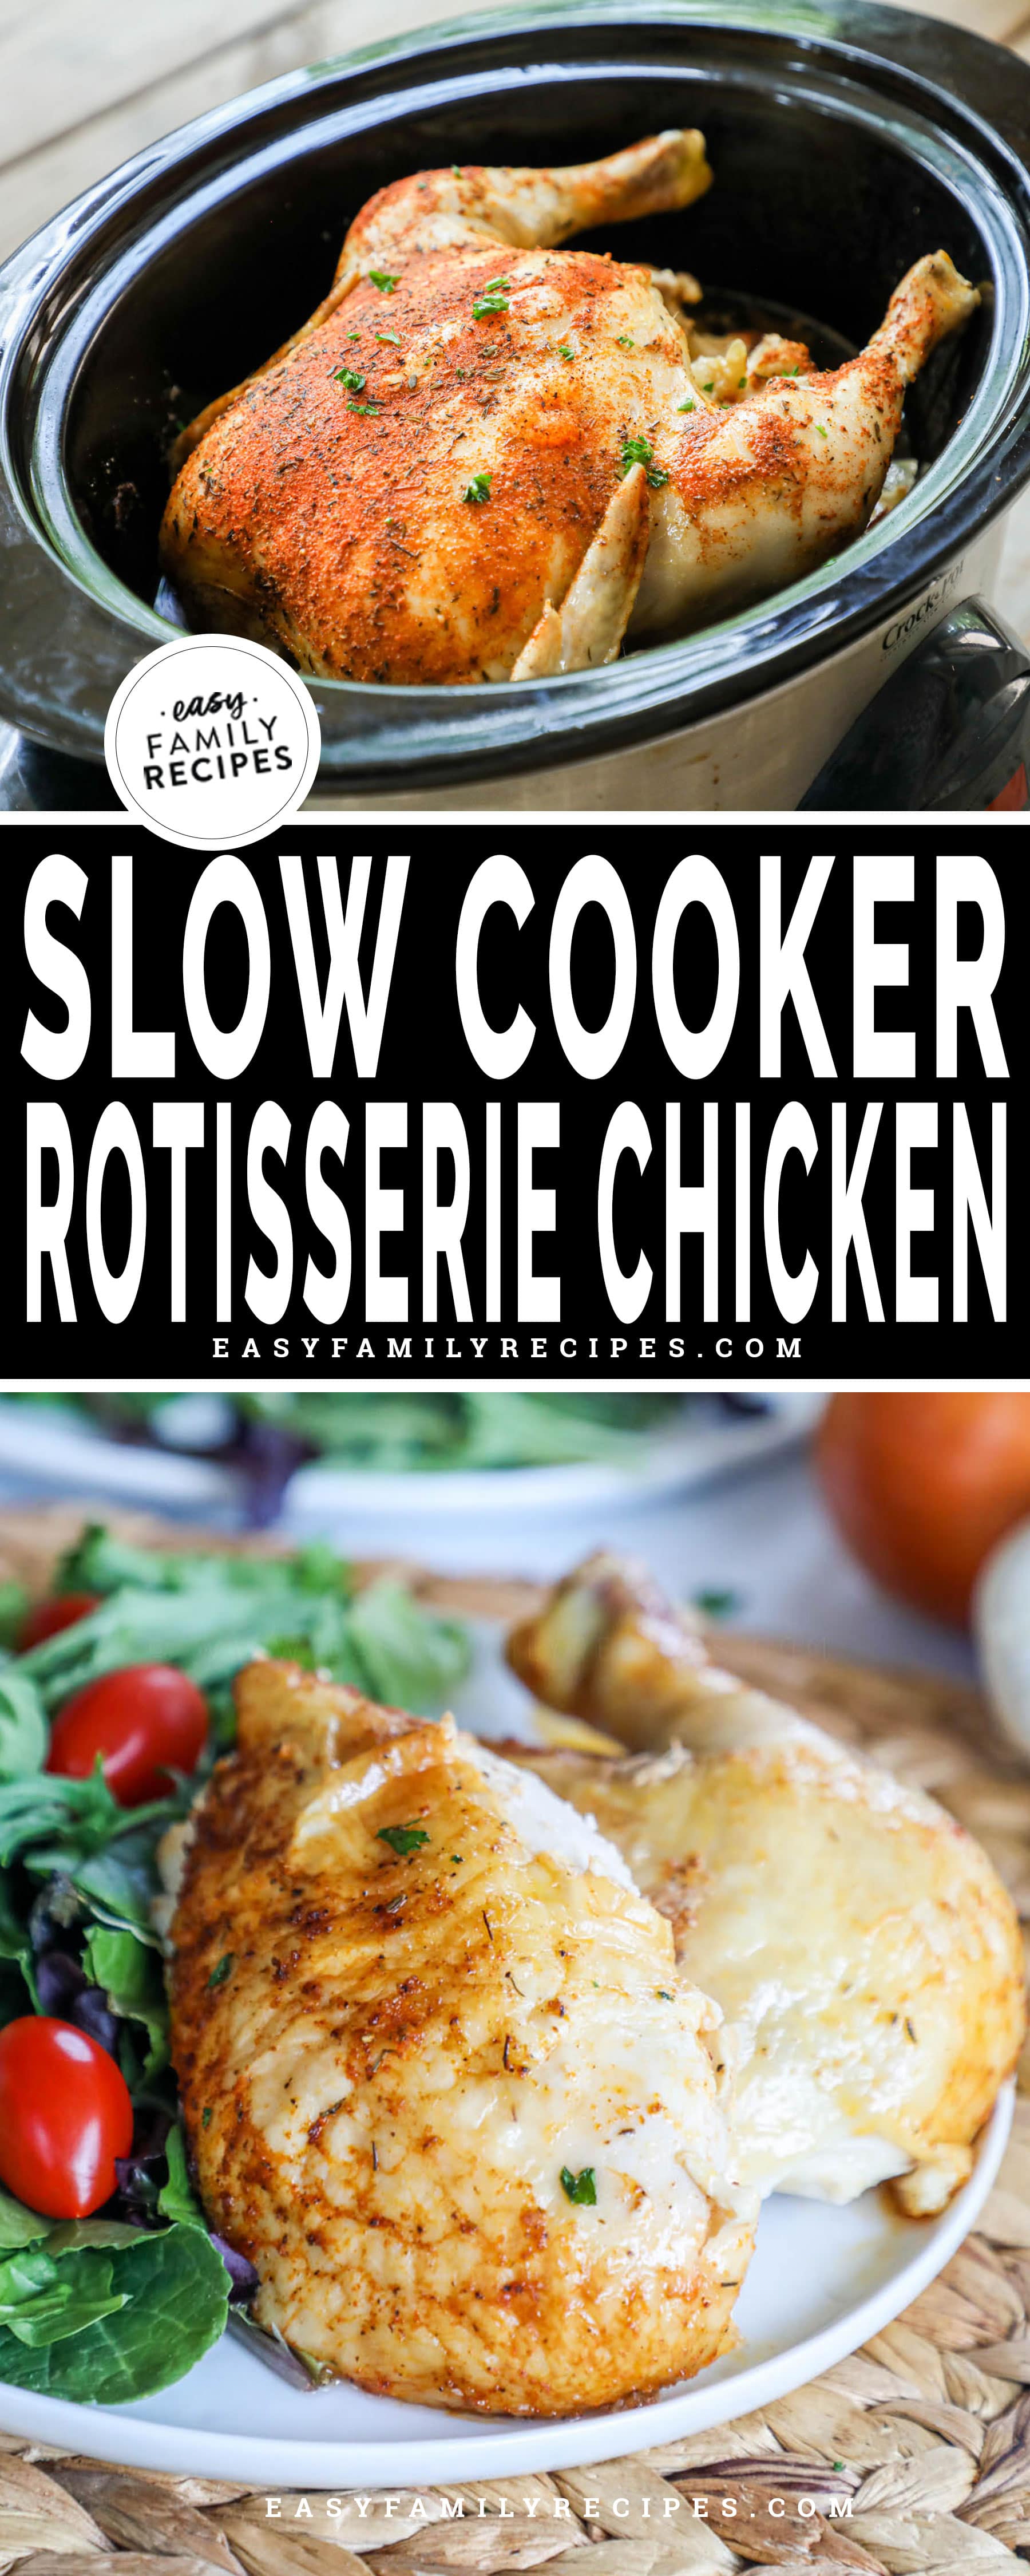 A slow cooker rotisserie chicken cooked and served with salad